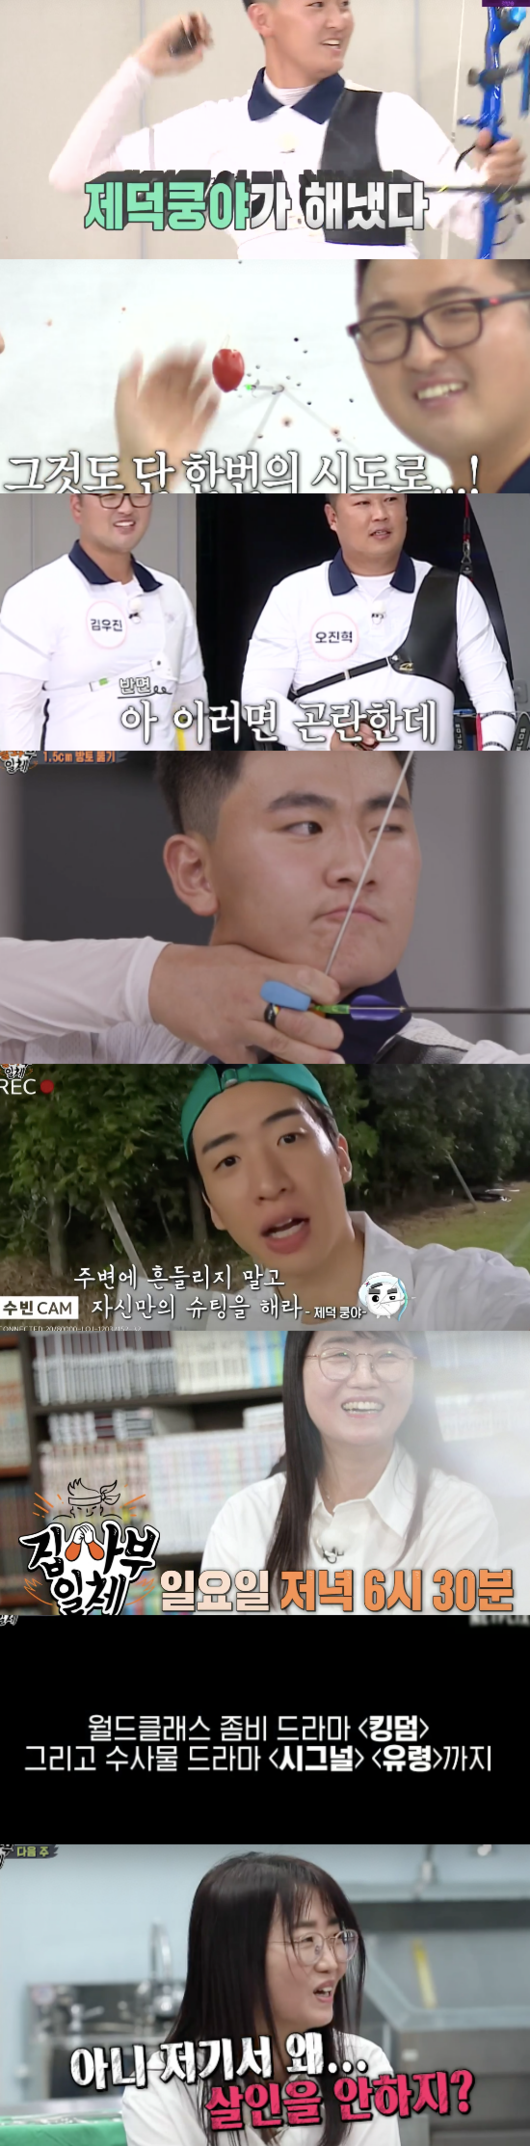 Archery is different (All The Butlers)In All The Butlers, Kim je-deok showed his fanfare for Weki Meki, and he showed his ability to hit the drop tomato target.Six national players from the archery appeared in the SBS entertainment All The Butlers broadcast on the 29th.Lee Seung-gi proposed to hit a drop tomatoes on the spot, with six Olympic gold medalists appearing together for the first time on the show. Kim Woo-jin first failed to win the Top Model,Anshan said Top Model and Anshan were stunning, and he was nervous about taking a bow in two weeks.All of them were the main character of the three kings, Kim je-deok shouted fighting, and Anshan laughed and then nervous again, failing to make a difference of 1mm.The YB teams last hope, Kim je-deok, was the top model, calculating the error and again the top model with the o-key; Kim je-deok hit just three times.Oh Jin-hyuk, the last runner of the OB team, hit the Top Model, the Top Model only twice, and kept his pride.In earnest, he decided to stage a mixed-sex confrontation: Kim je-deoks coach appeared together as commentator; Kim je-deok had a chance to score 10 points from the start.This Subin was excited to Kim je-deok, saying, You are so good, why are you so good.Kim je-deok also revealed his fanfare by asking for Weki Mekis song as a victory song.At this time, when all said, Jedeok, you should have danced to the Weki Meki song, Choi Yoo-jung will be watching, Jedeok also showed a vast explosion and cute dance.Lee Seung-gi and Yang Se-hyeong each showed confidence in 10 points, while Yang Se-hyeong scored a top model and five points to give a laugh.Yang Se-hyeong laughed in a embarrassed way. Subin was busy teasing him as the lowest point ever.Yang Se-hyeong laughed, saying, Cut the 10-point interview.Lee Seung-gi, who scored five points to Subin in the mood, said, You know the entertainer, the broadcast, you have done the difficult thing.On the other hand, All The Butlers is a program that presents a special day that will be a feeling to young people who are wandering in the most brilliant moment of life, many question marks.Capture All The Butlers Broadcast Screen